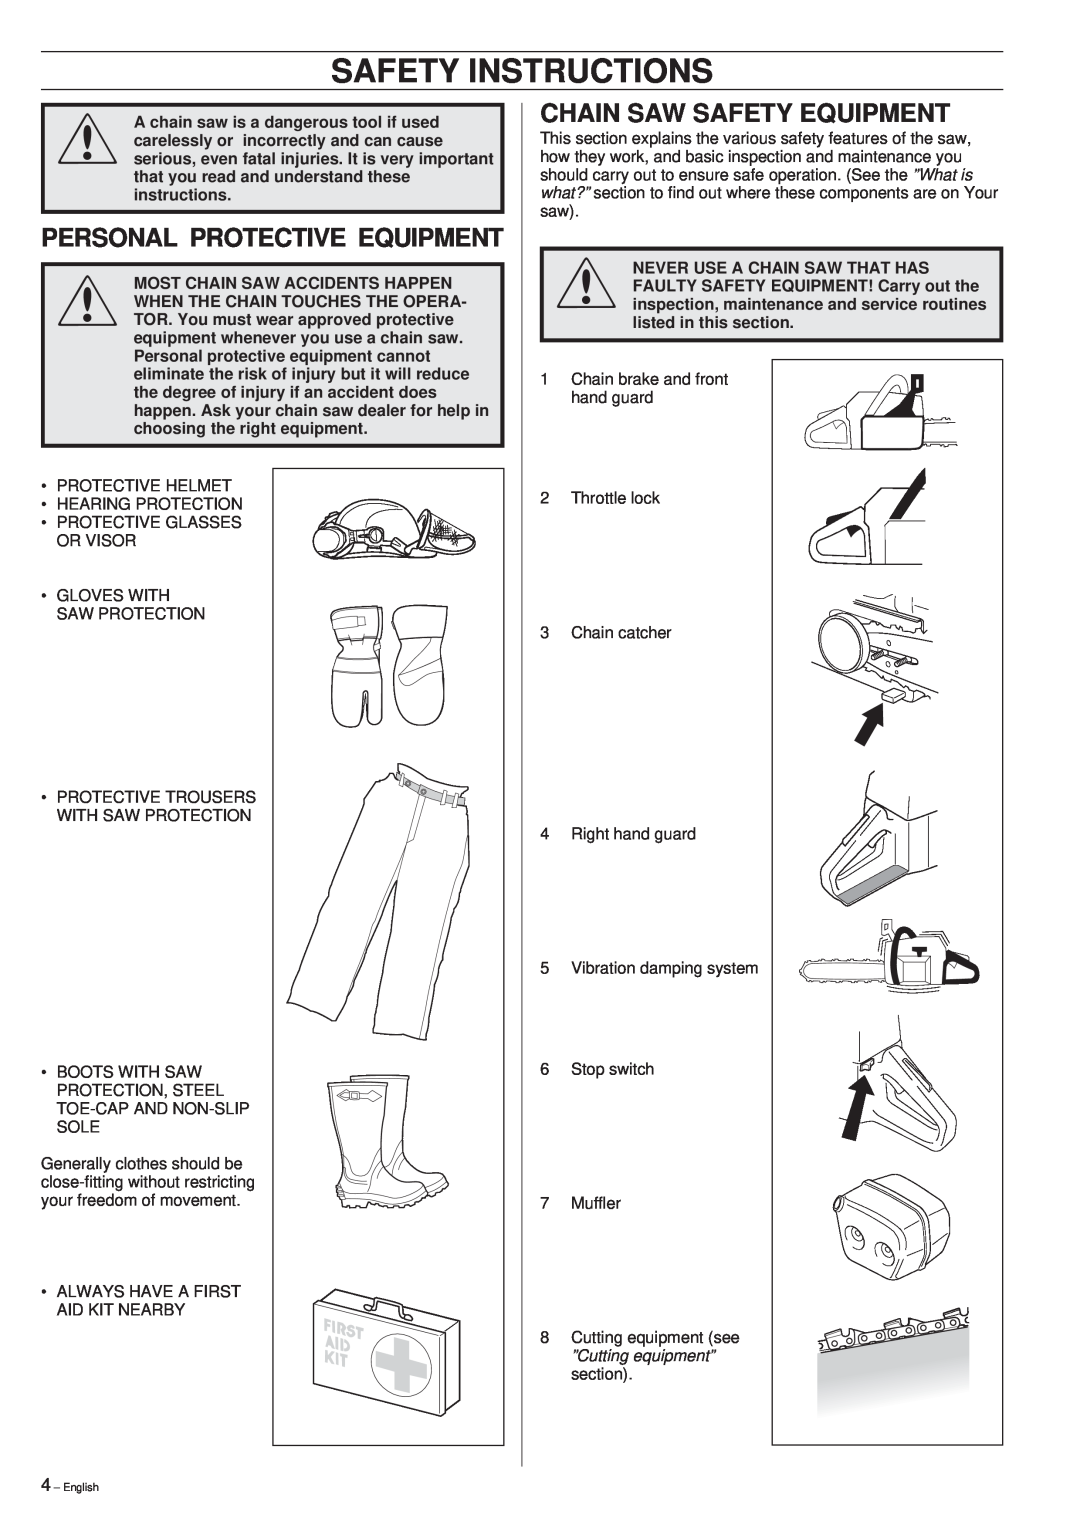 Husqvarna 45 manual Safety Instructions, Personal Protective Equipment, Chain Saw Safety Equipment 